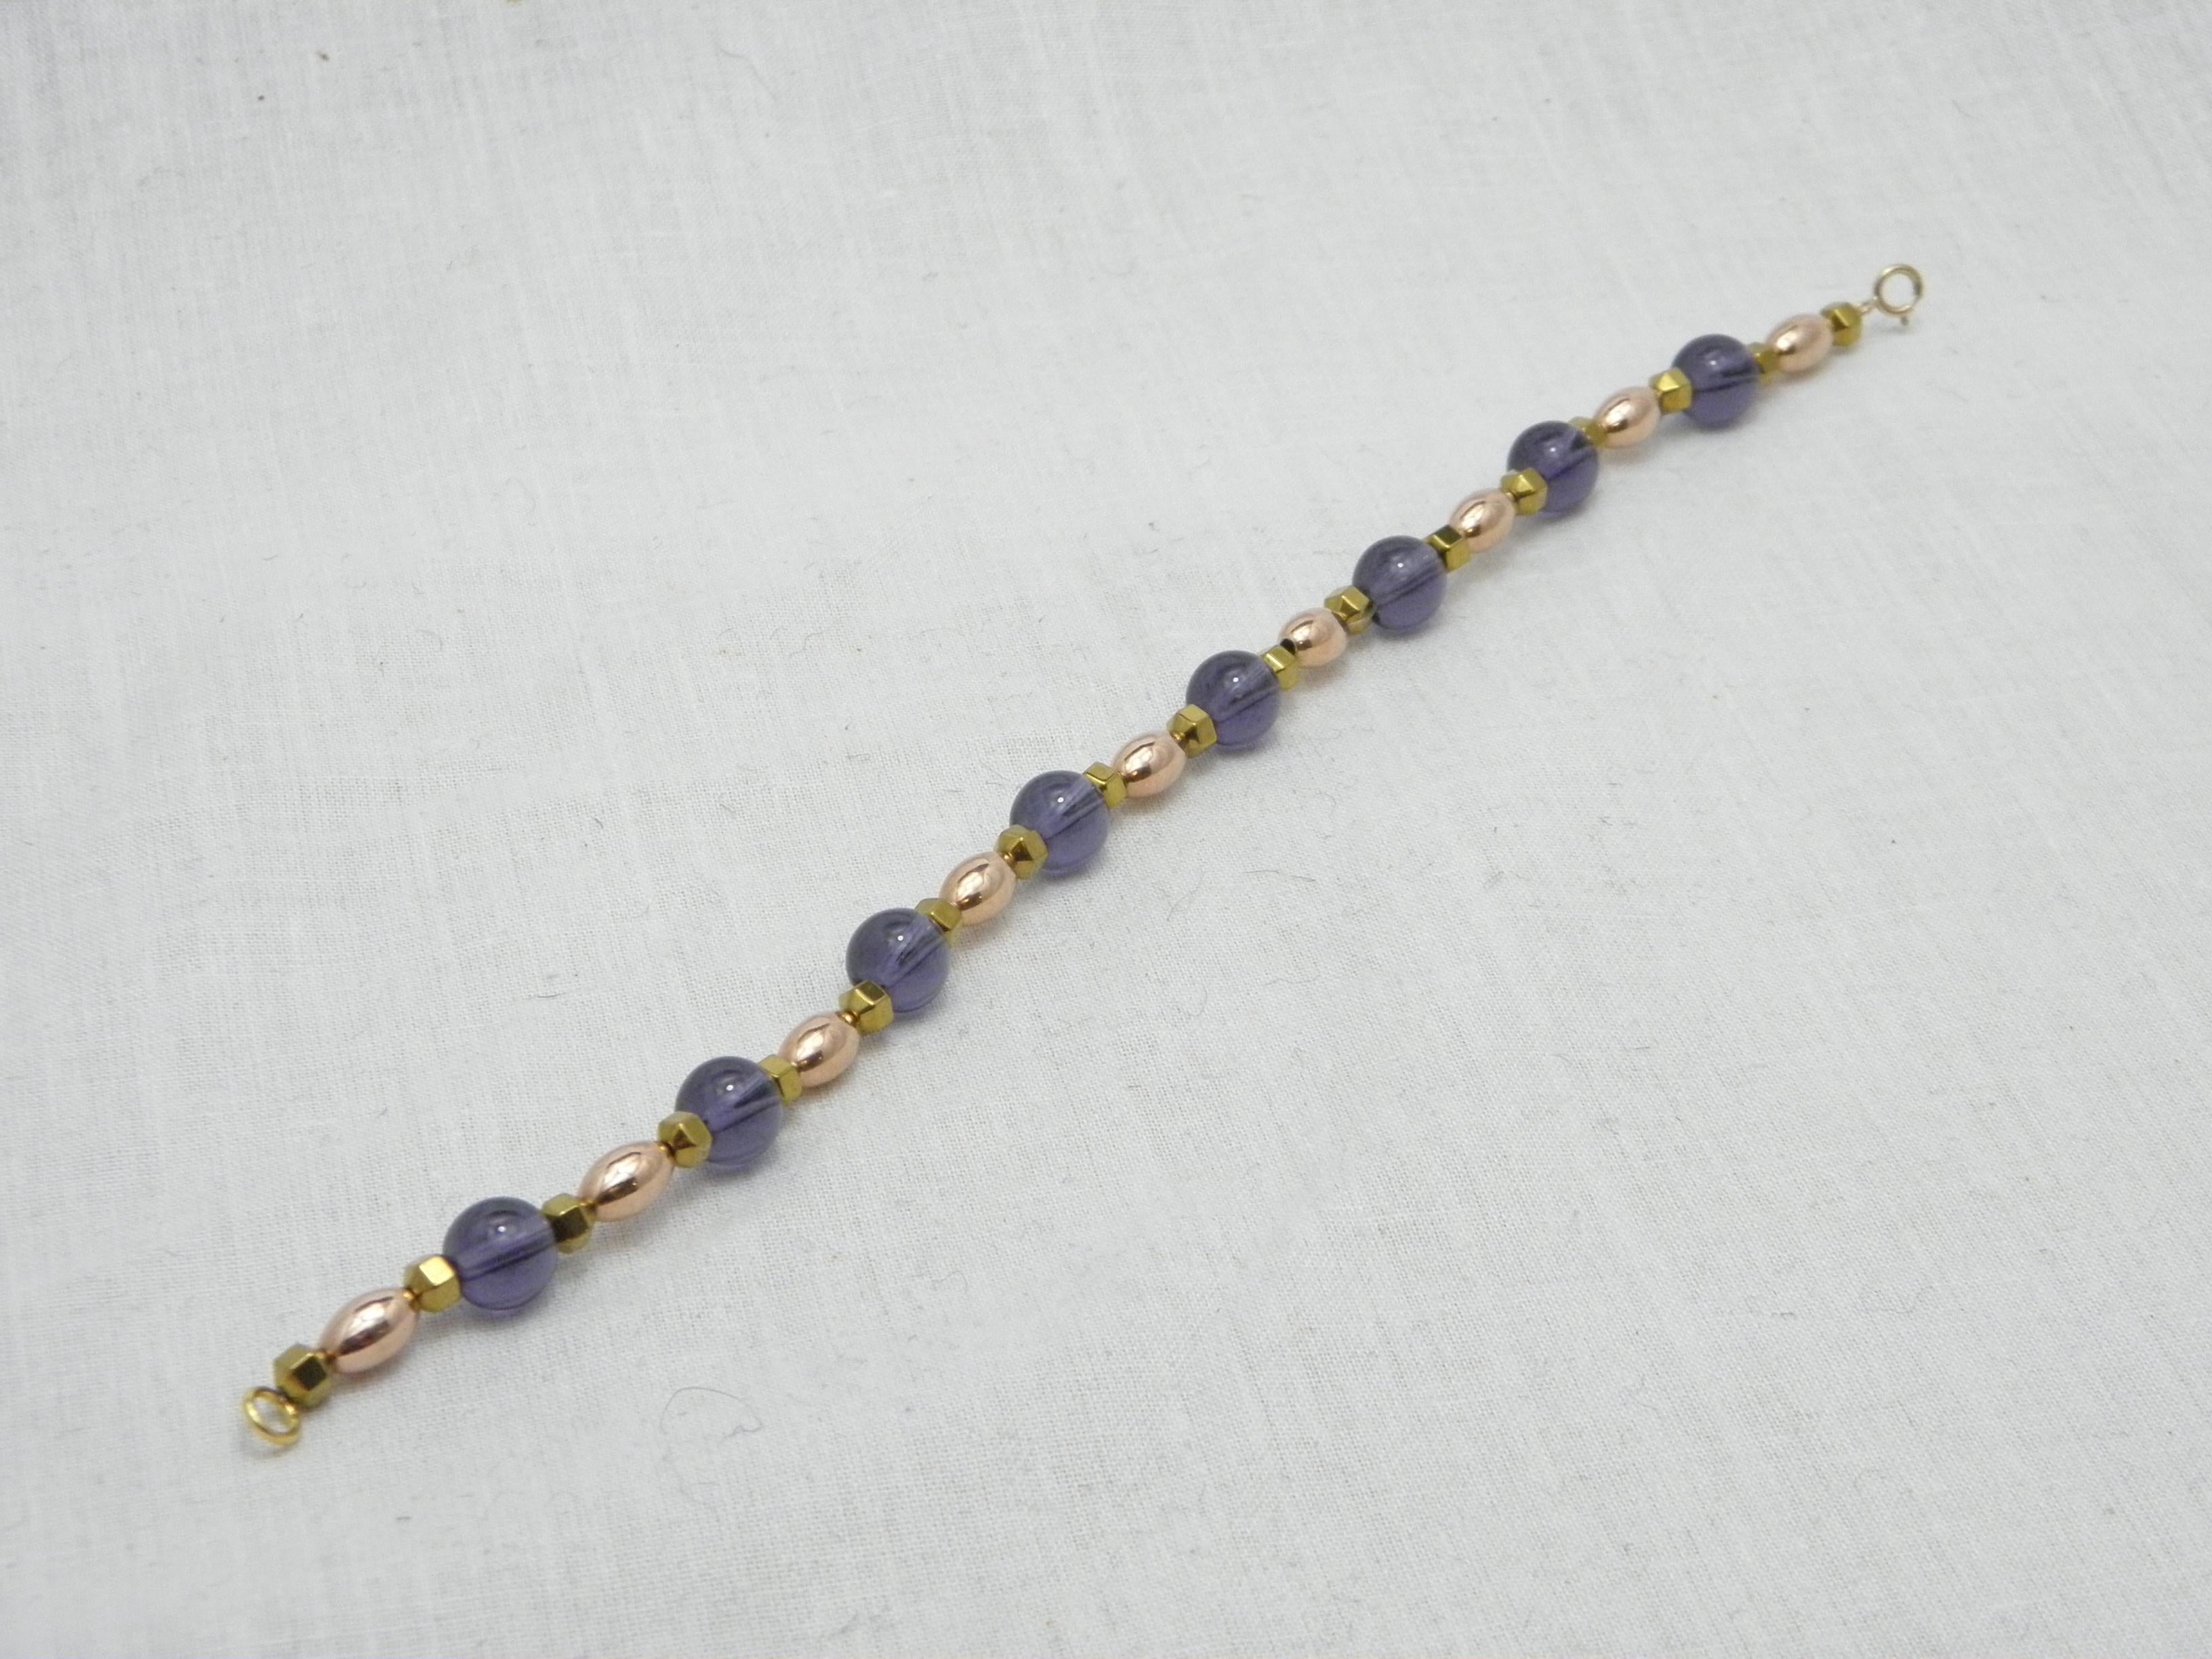 If you have landed on this page then you have an eye for beauty.

On offer is this gorgeous

9CT HEAVY GOLD AMETHYST BEADED LINE BRACELET

DETAILS
Material: Solid 9ct (375/000) yellow and rose gold
Gemstones: Lovely rounded cabochon amethyst